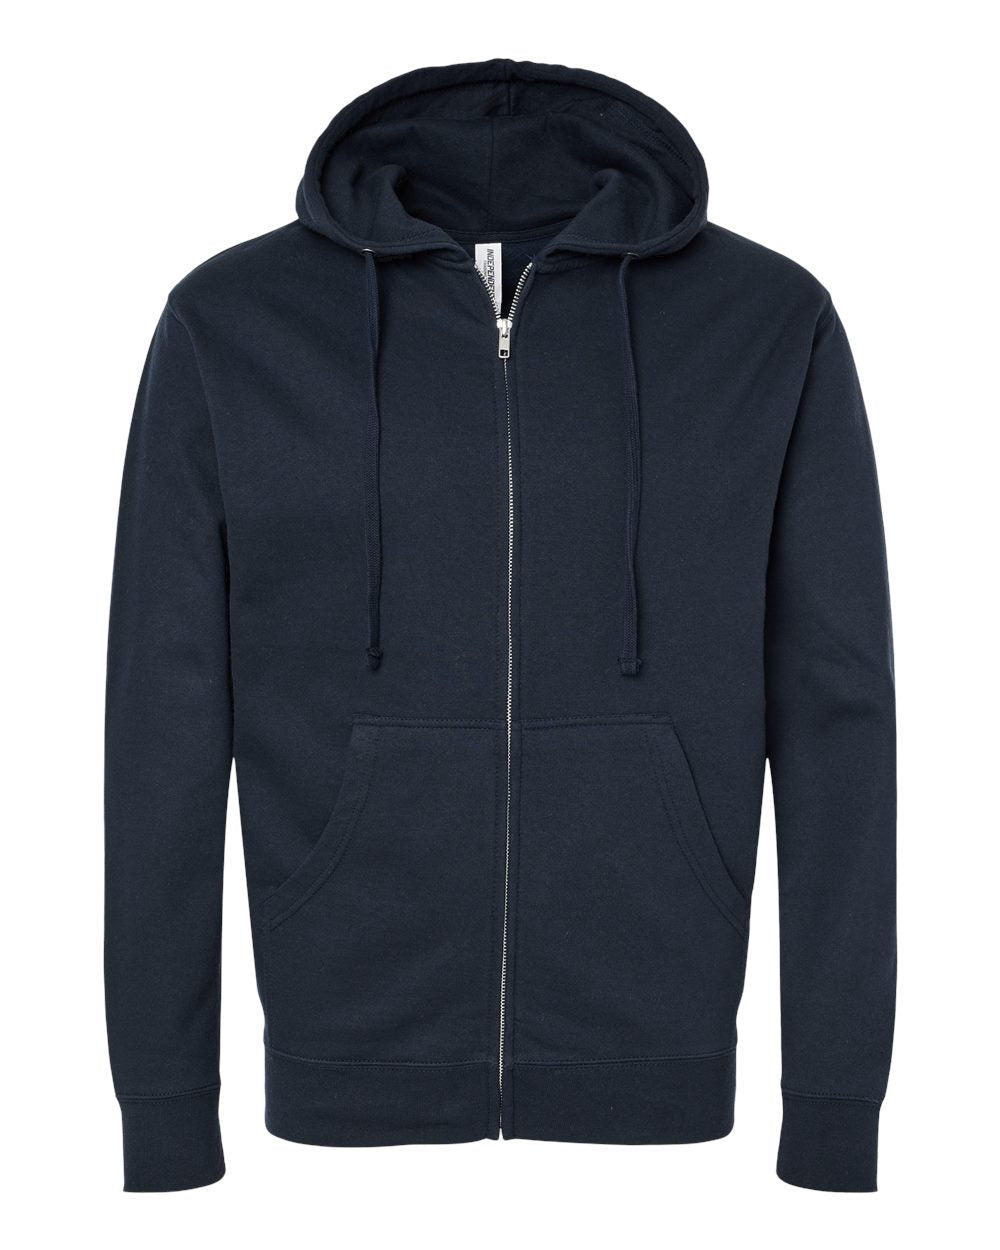 Independent Trading Co. Midweight Full-Zip Hooded Sweatshirt SS4500Z #color_Navy